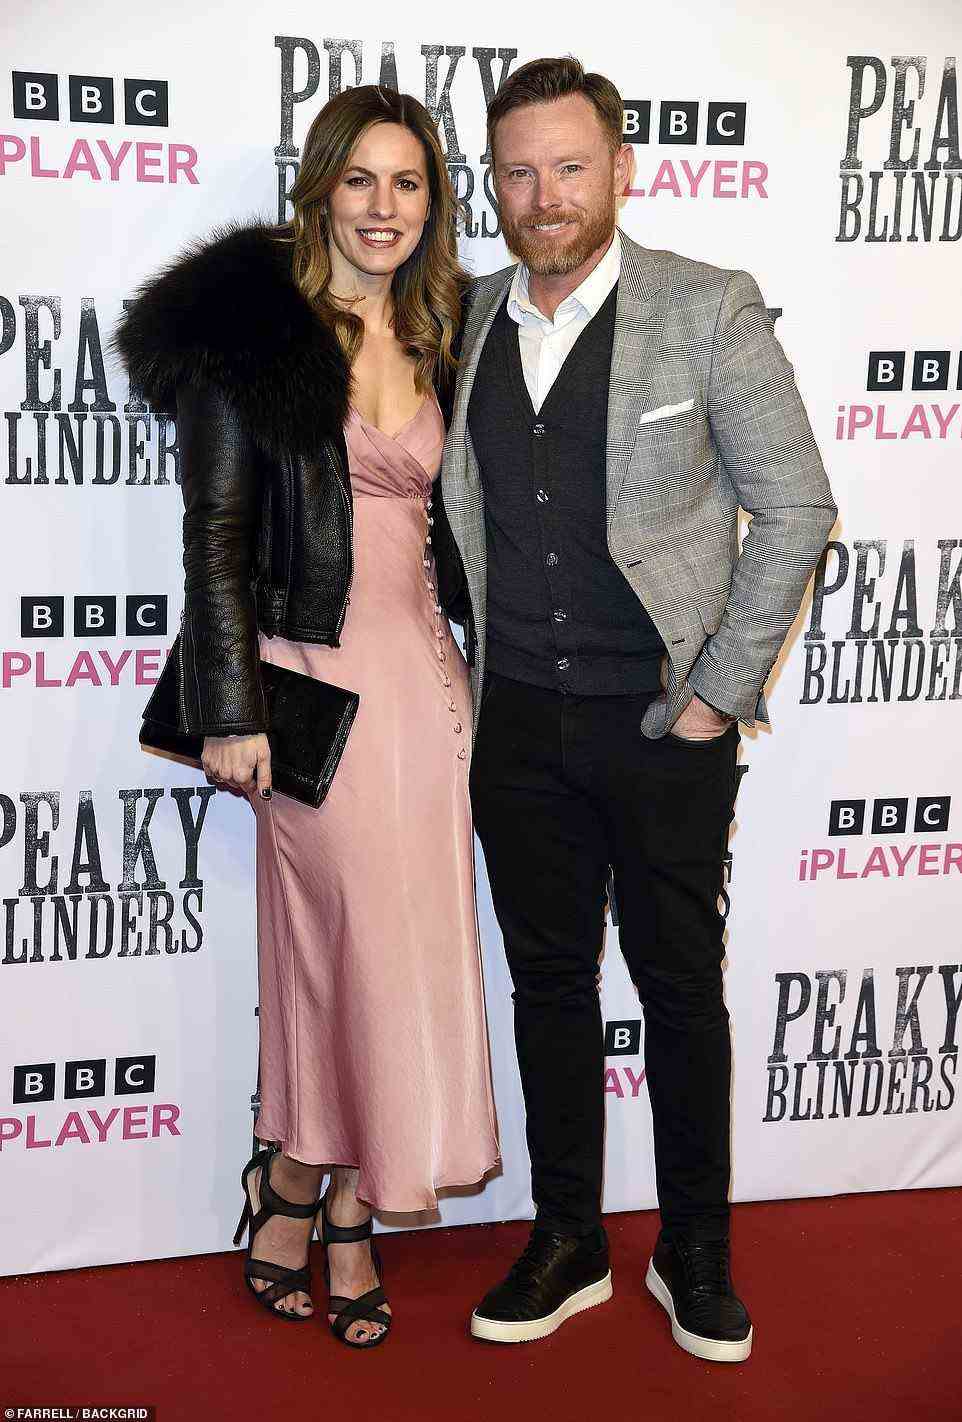 Date night: Cricketer Ian Bell looked dapper in a grey blazer as he attended with glam wife Chantal Louise Bastock